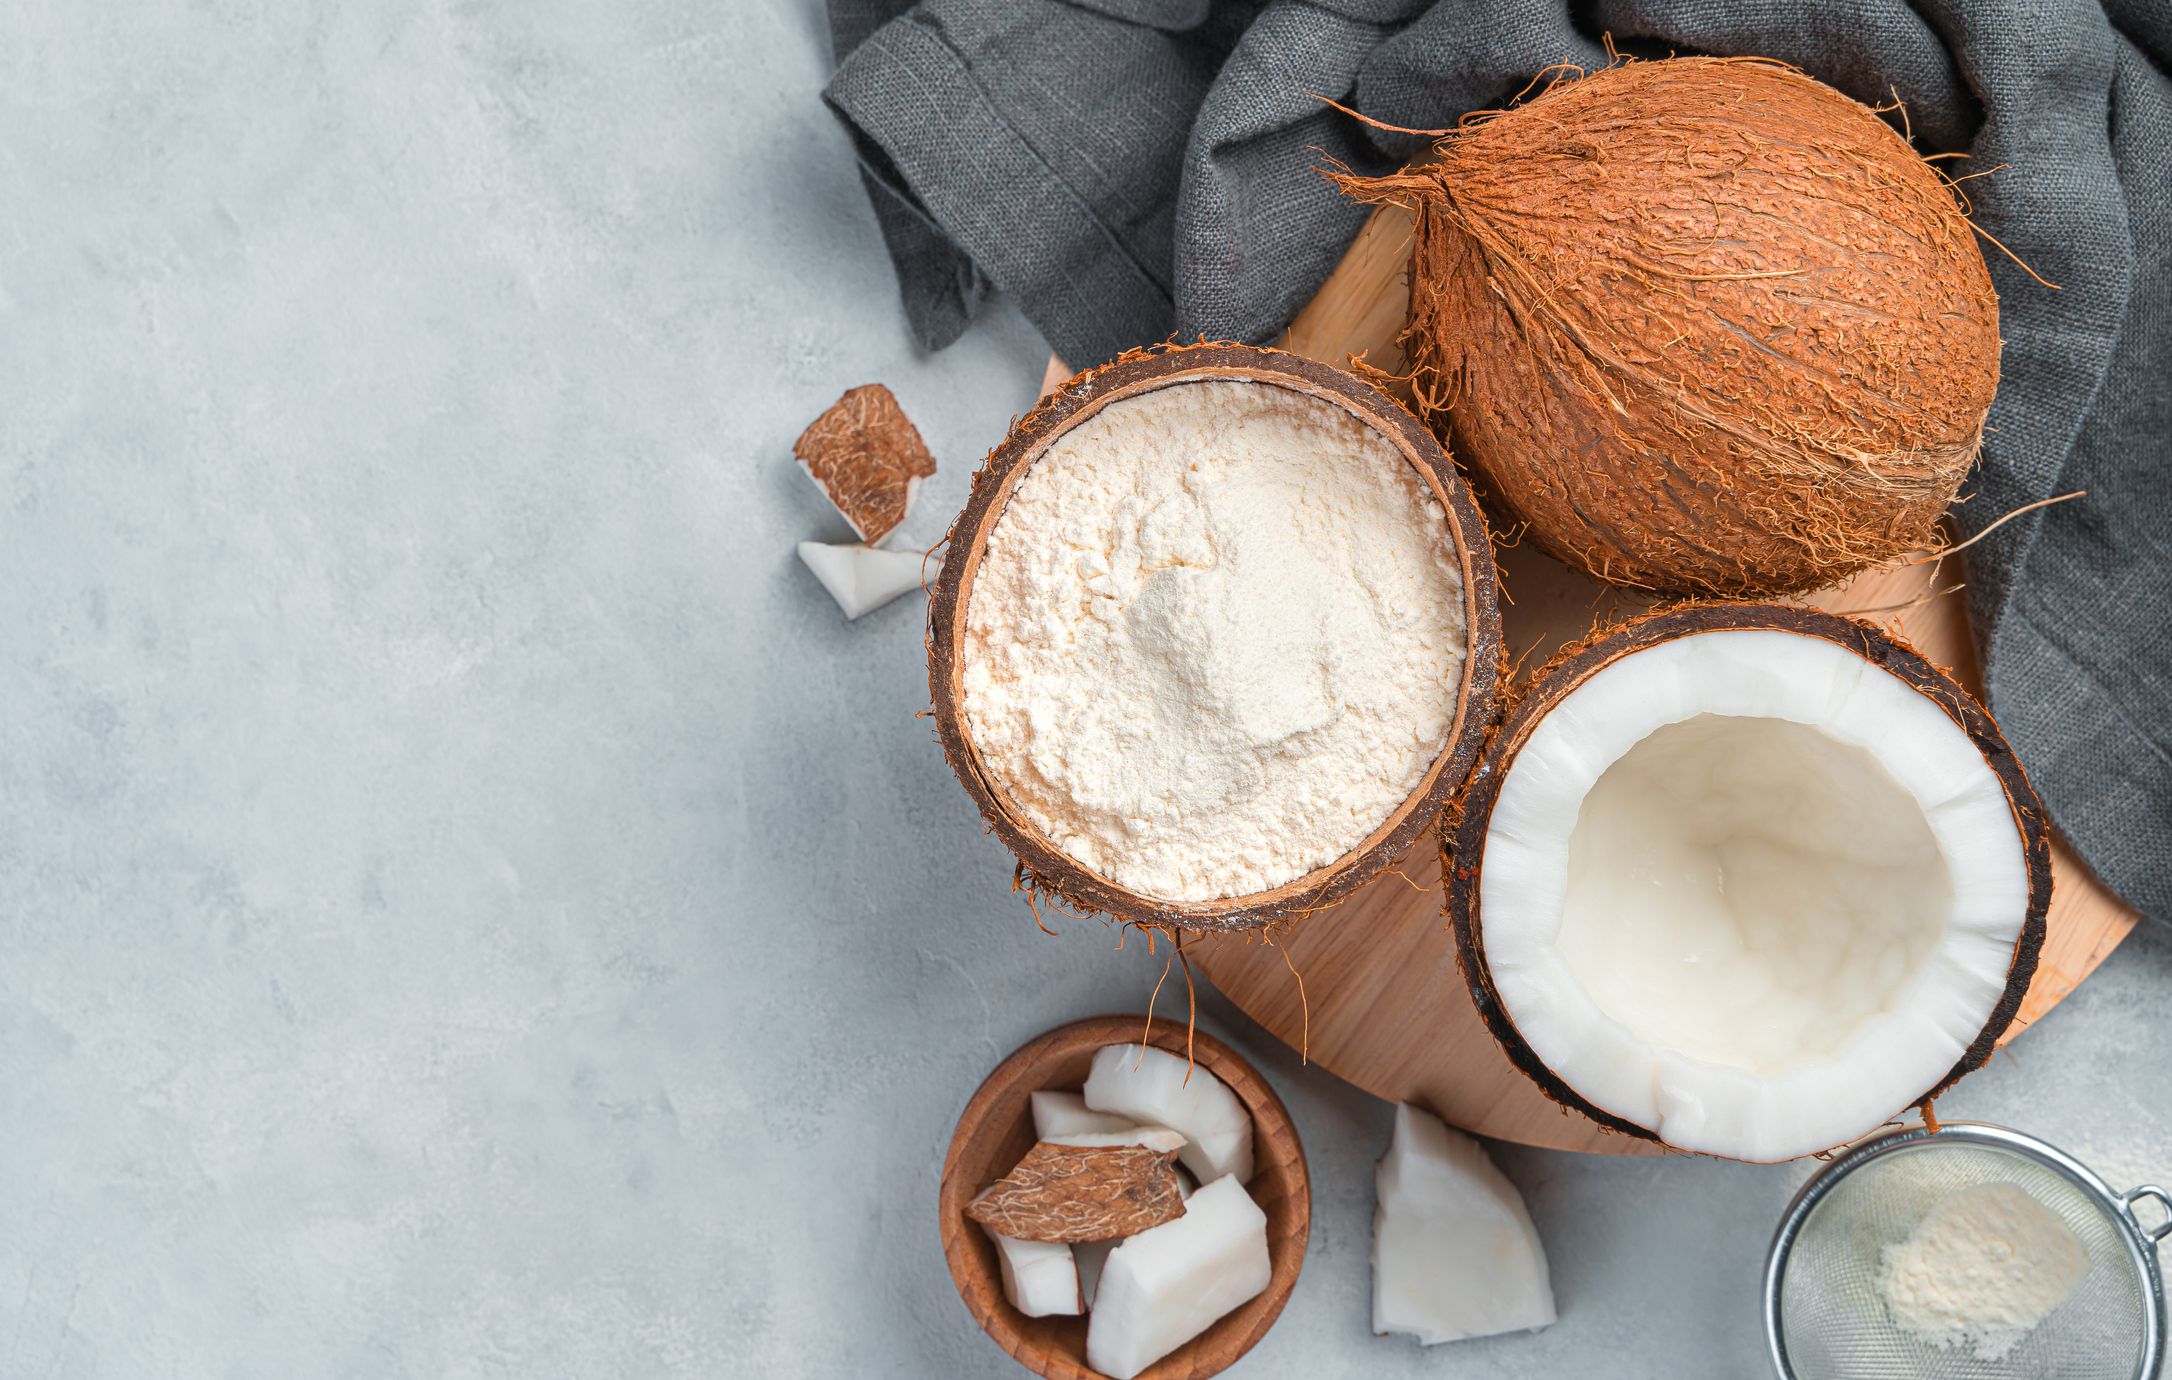 <p>This tropical fruit might lift your spirits when you have the winter blues.  Coconut is loaded with <a href="https://pubmed.ncbi.nlm.nih.gov/27080715/">medium-chain triglycerides</a> fats known to promote the production of serotonin in the brain. According to a joint study by <a href="https://www.ncbi.nlm.nih.gov/pmc/articles/PMC2671041/">SUNY Albany and Yale</a> researchers, coconut also has a neuroprotective effect.</p>